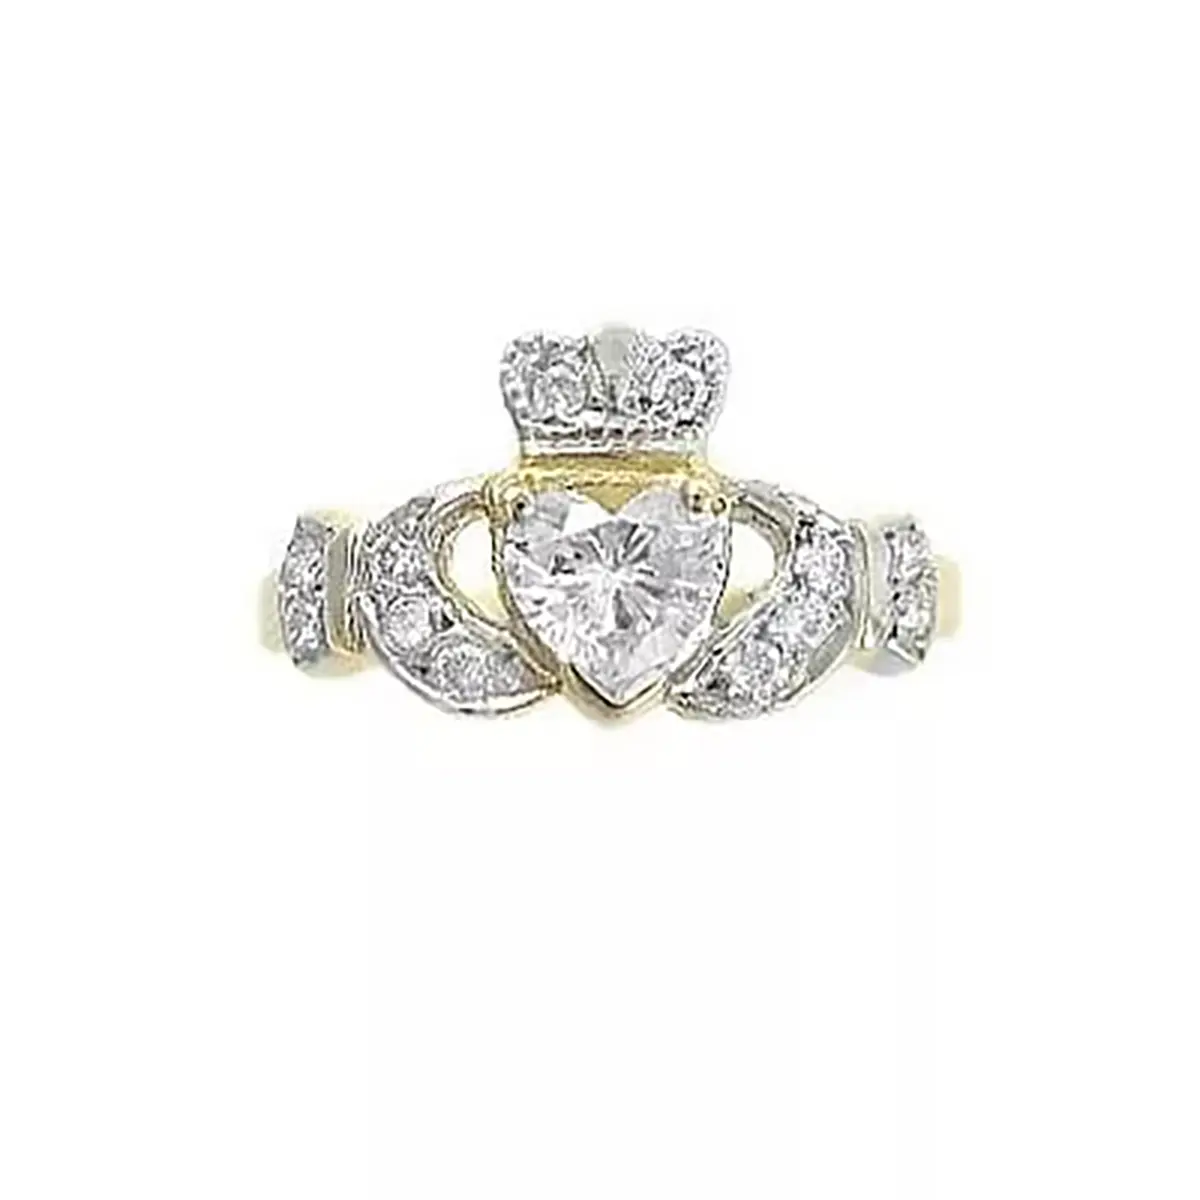 1_aYellow Gold Heart Diamond Encrusted Claddagh Engagement Ring